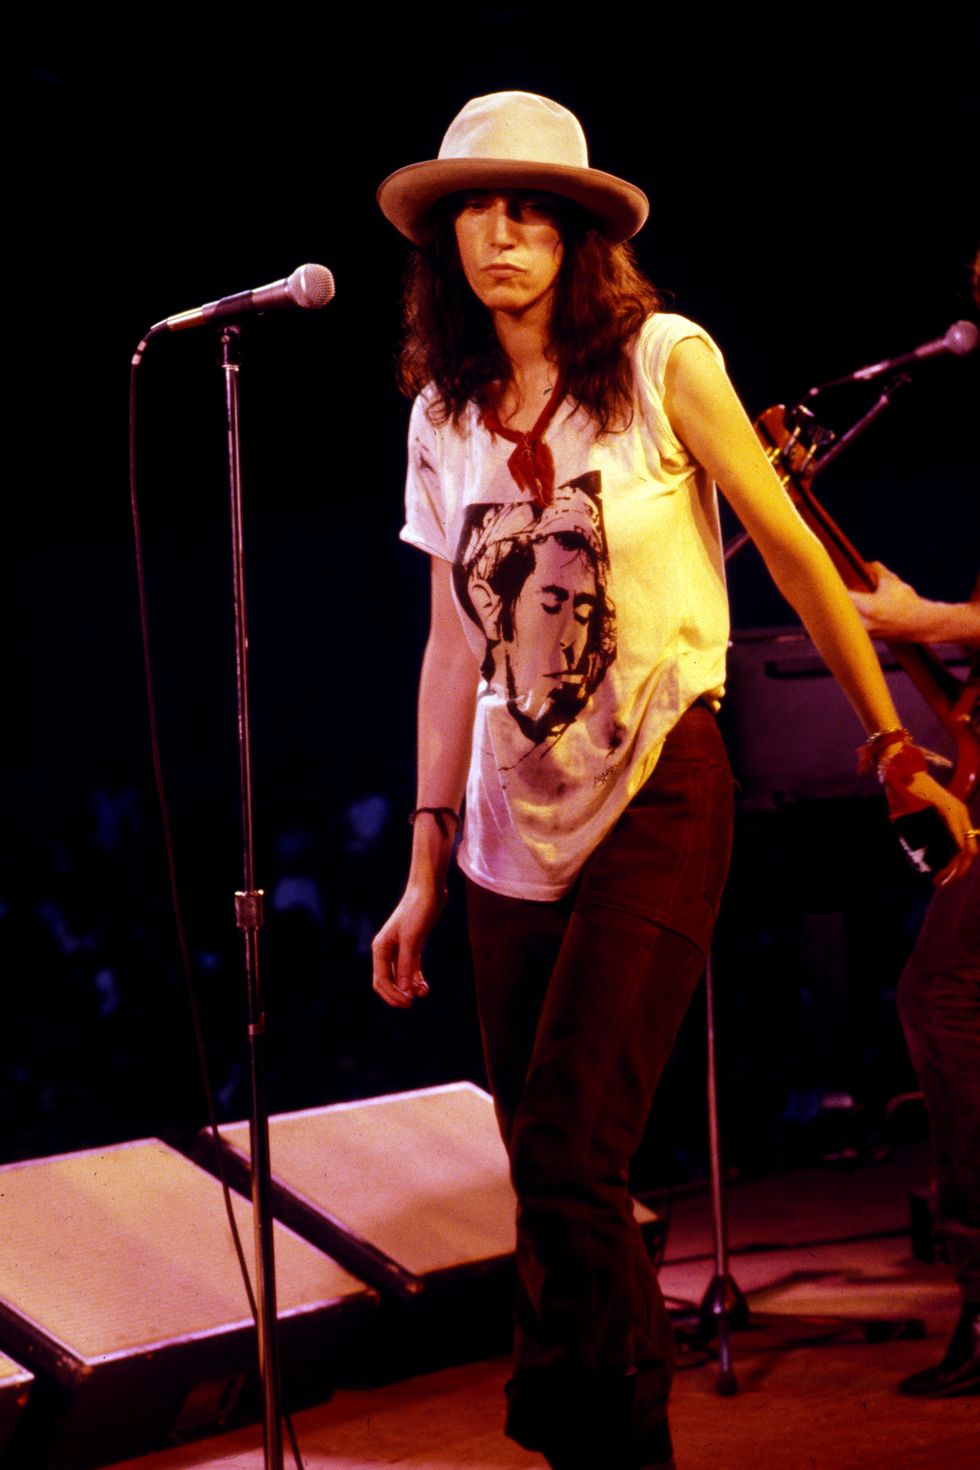 NEW YORK - AUGUST 04: Patti Smith performs live on stage with The Patti Smith Group in Central Park as part of The Dr Pepper Music Festival on August 04 1978 (Photo by Richard E. Aaron/Redferns)